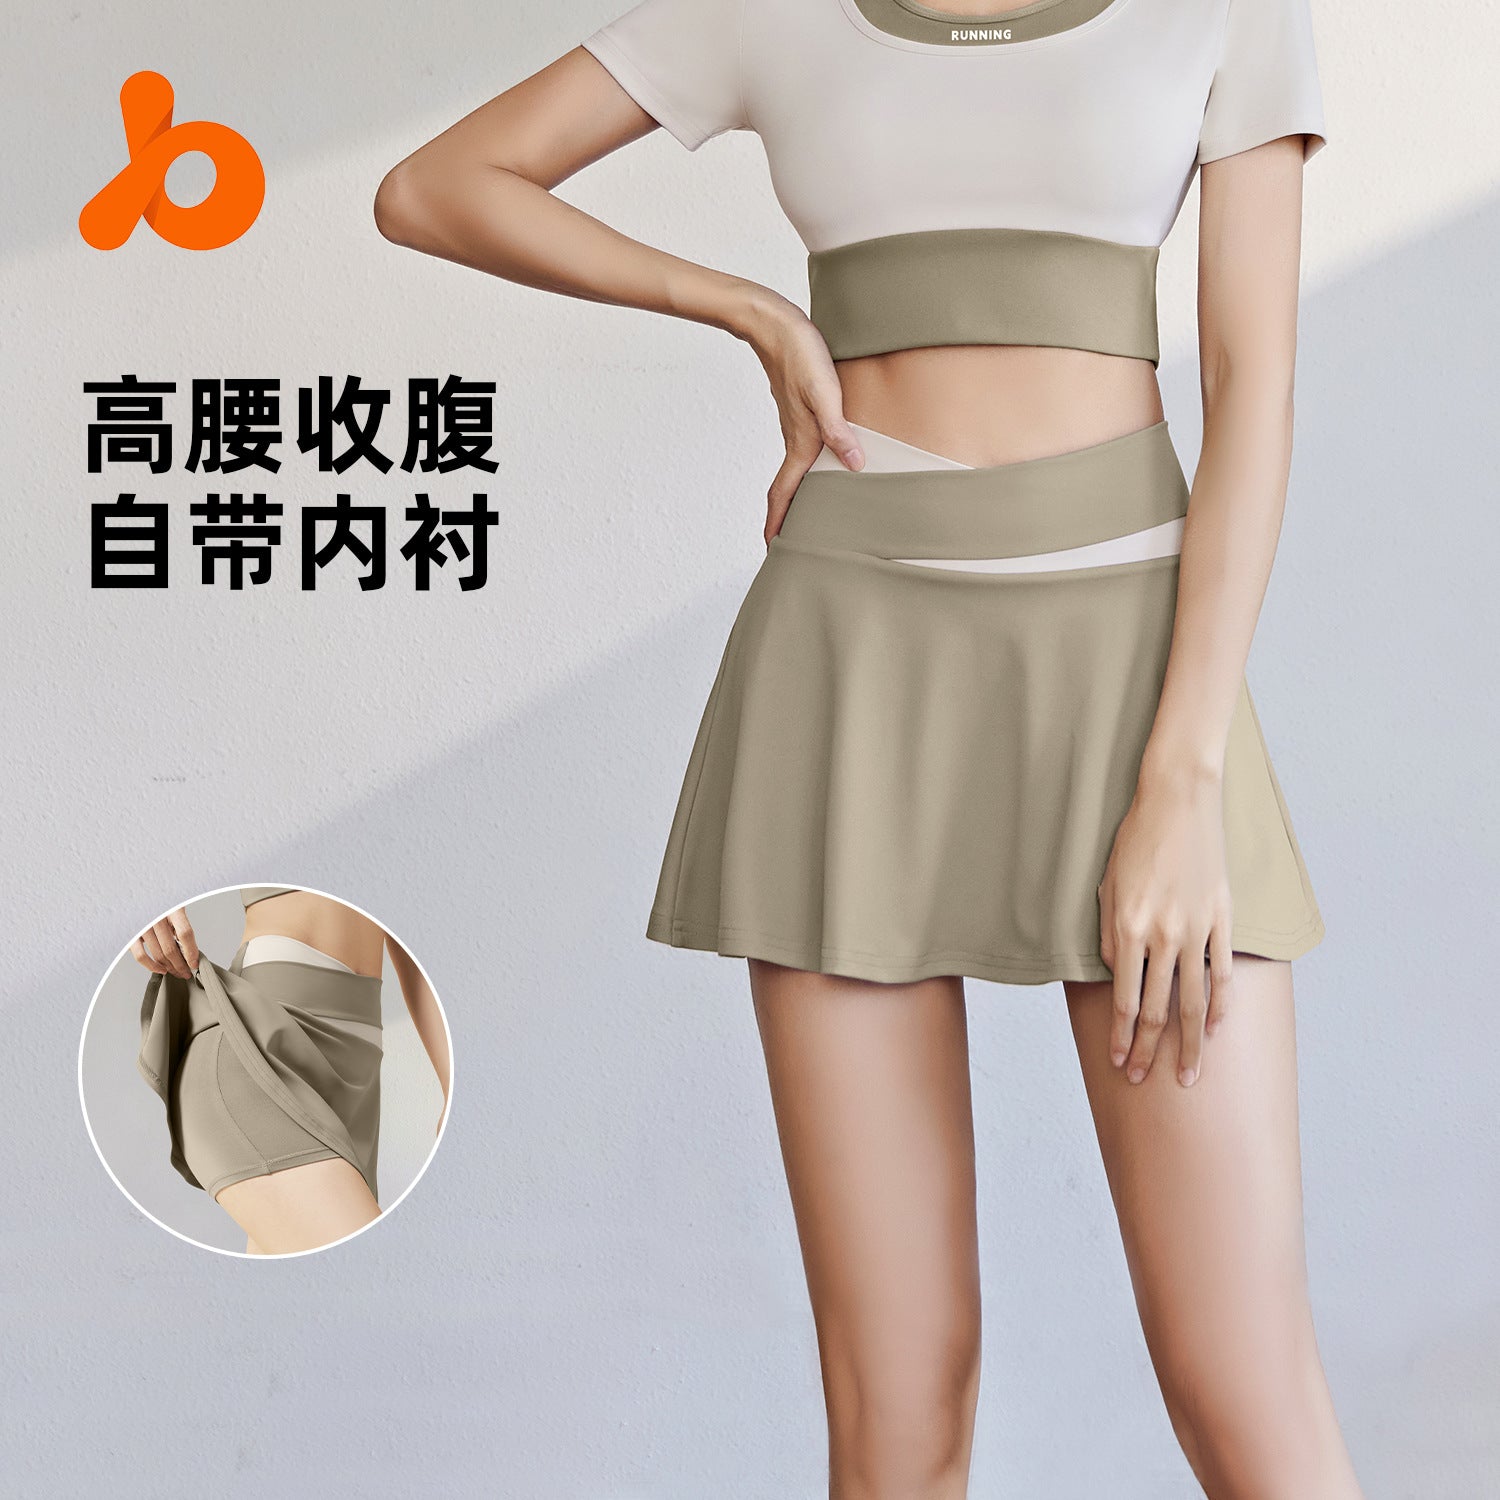 Juyitang nude tight sports short skirt quick-drying anti-walking light color-blocked fake two-piece short skirt running fitness short skirt